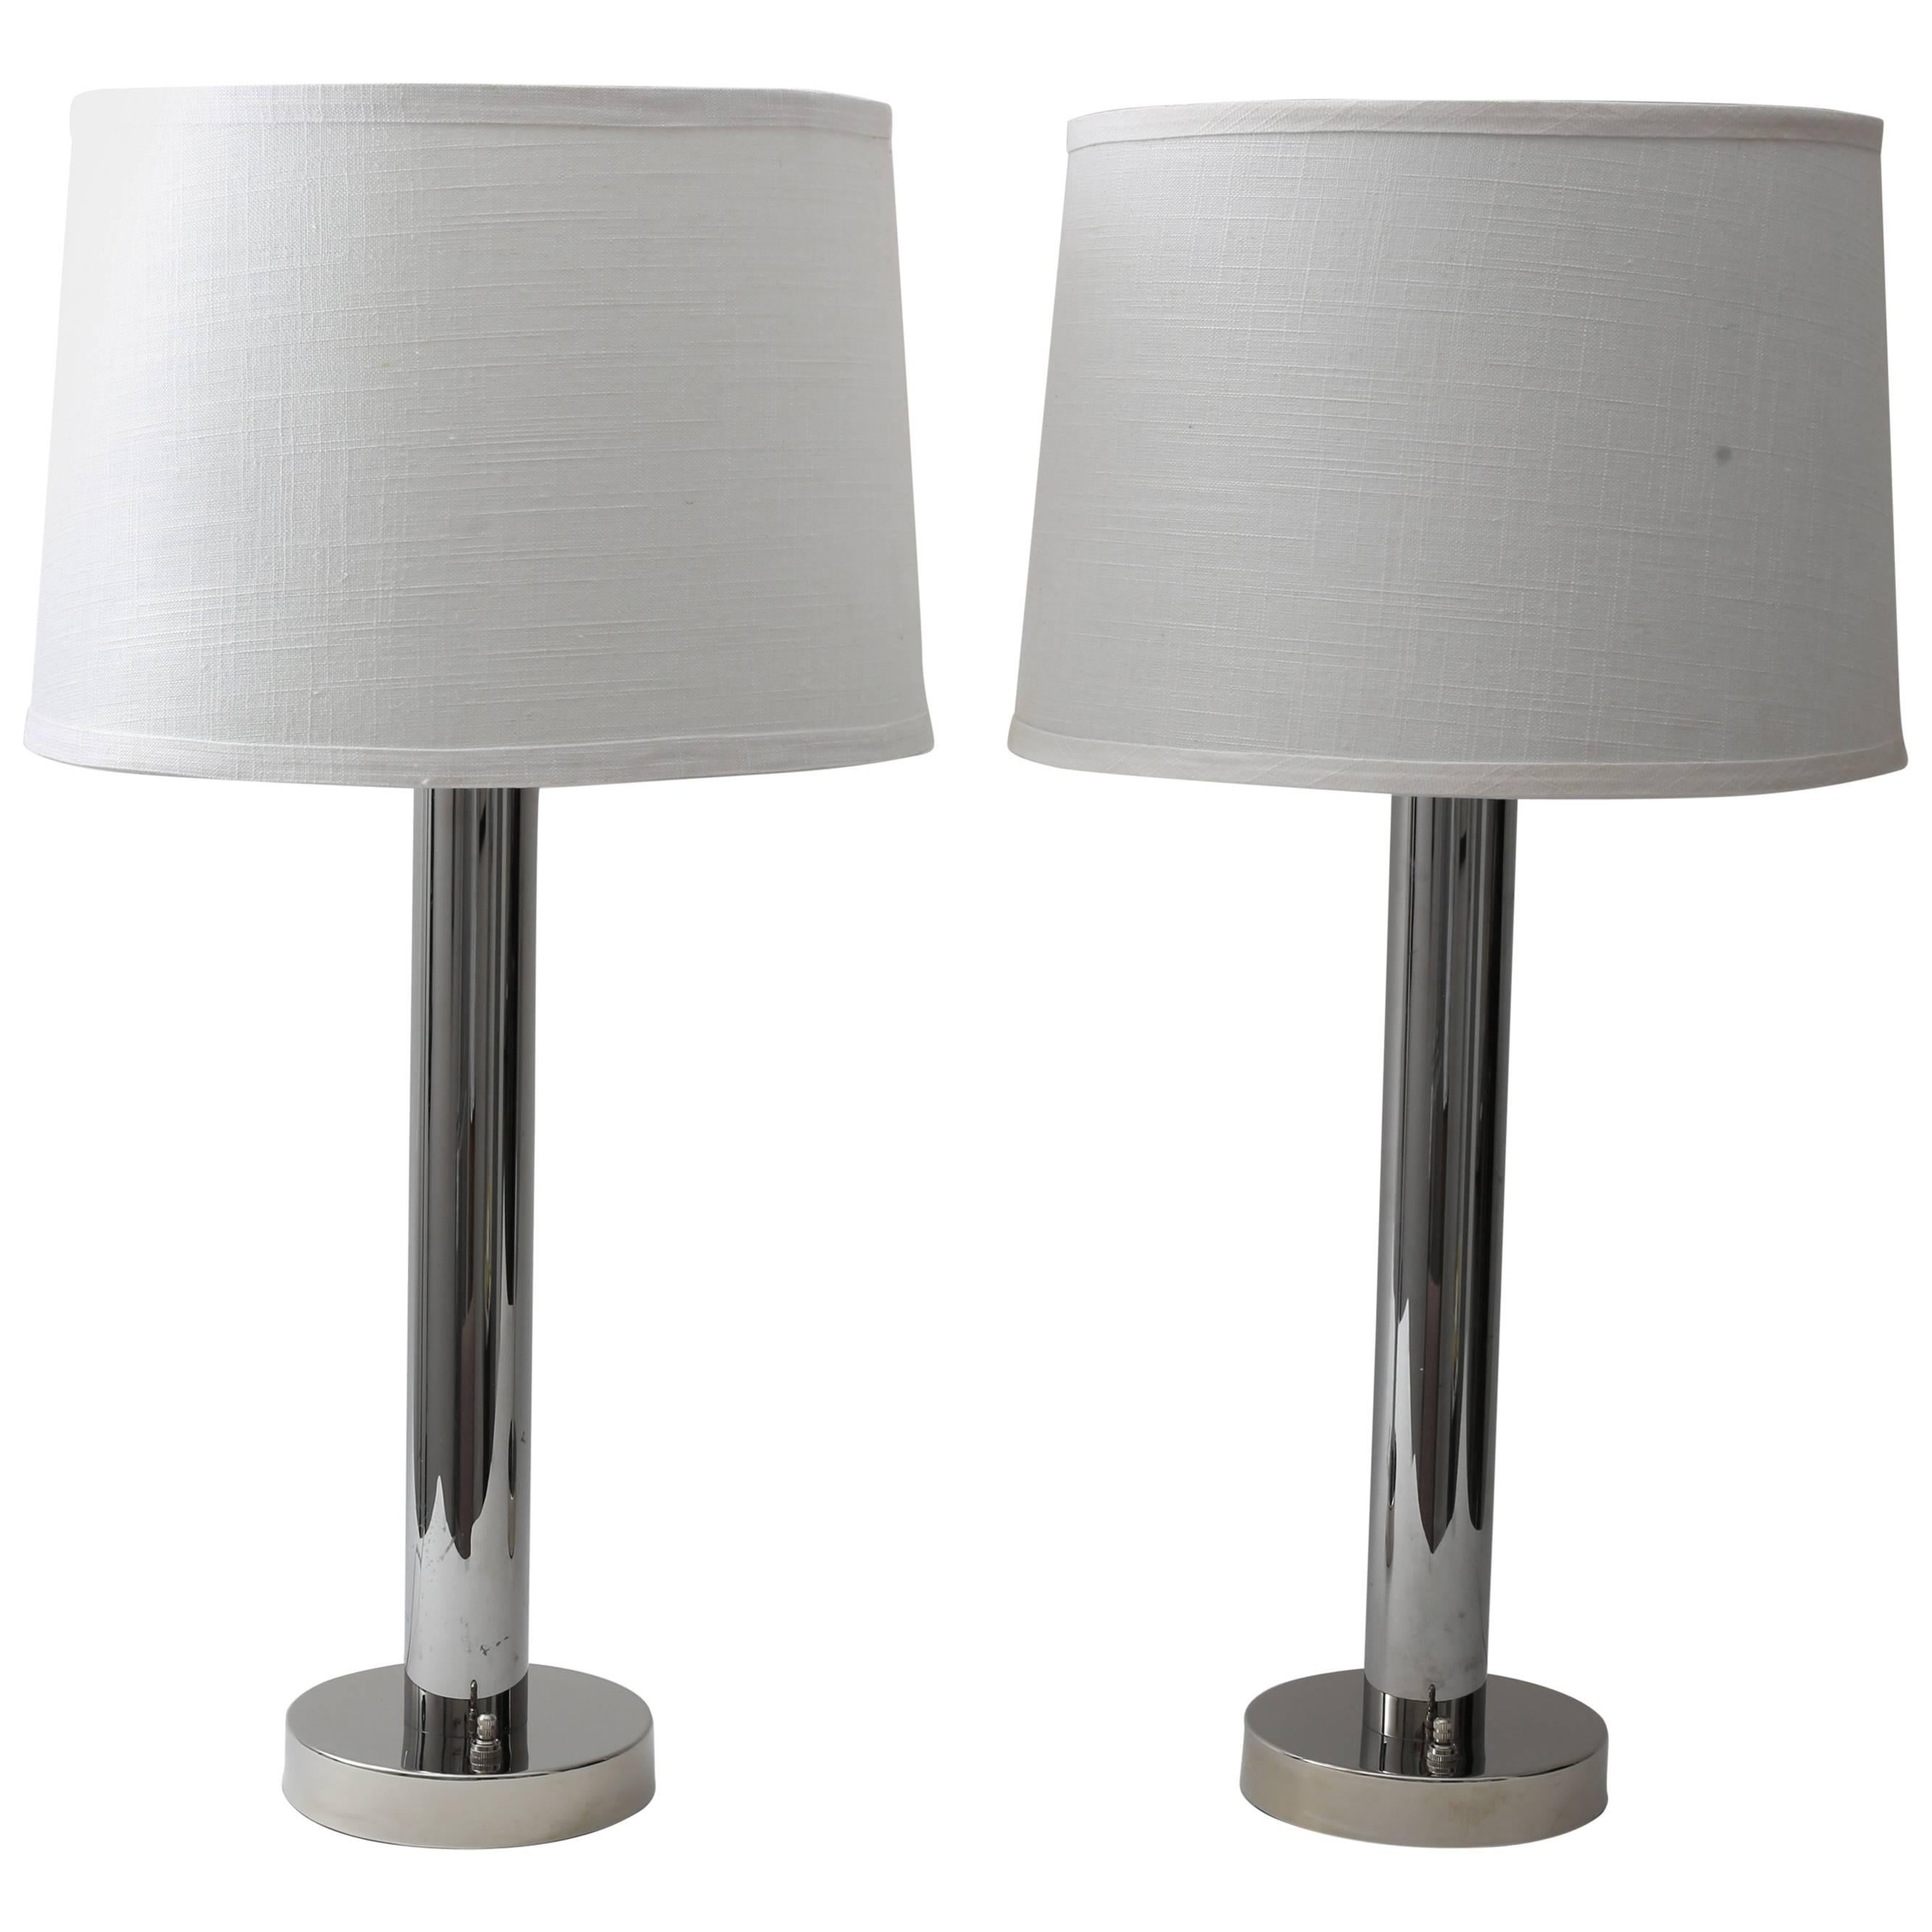 Pair of Polished Chrome Table Lamps